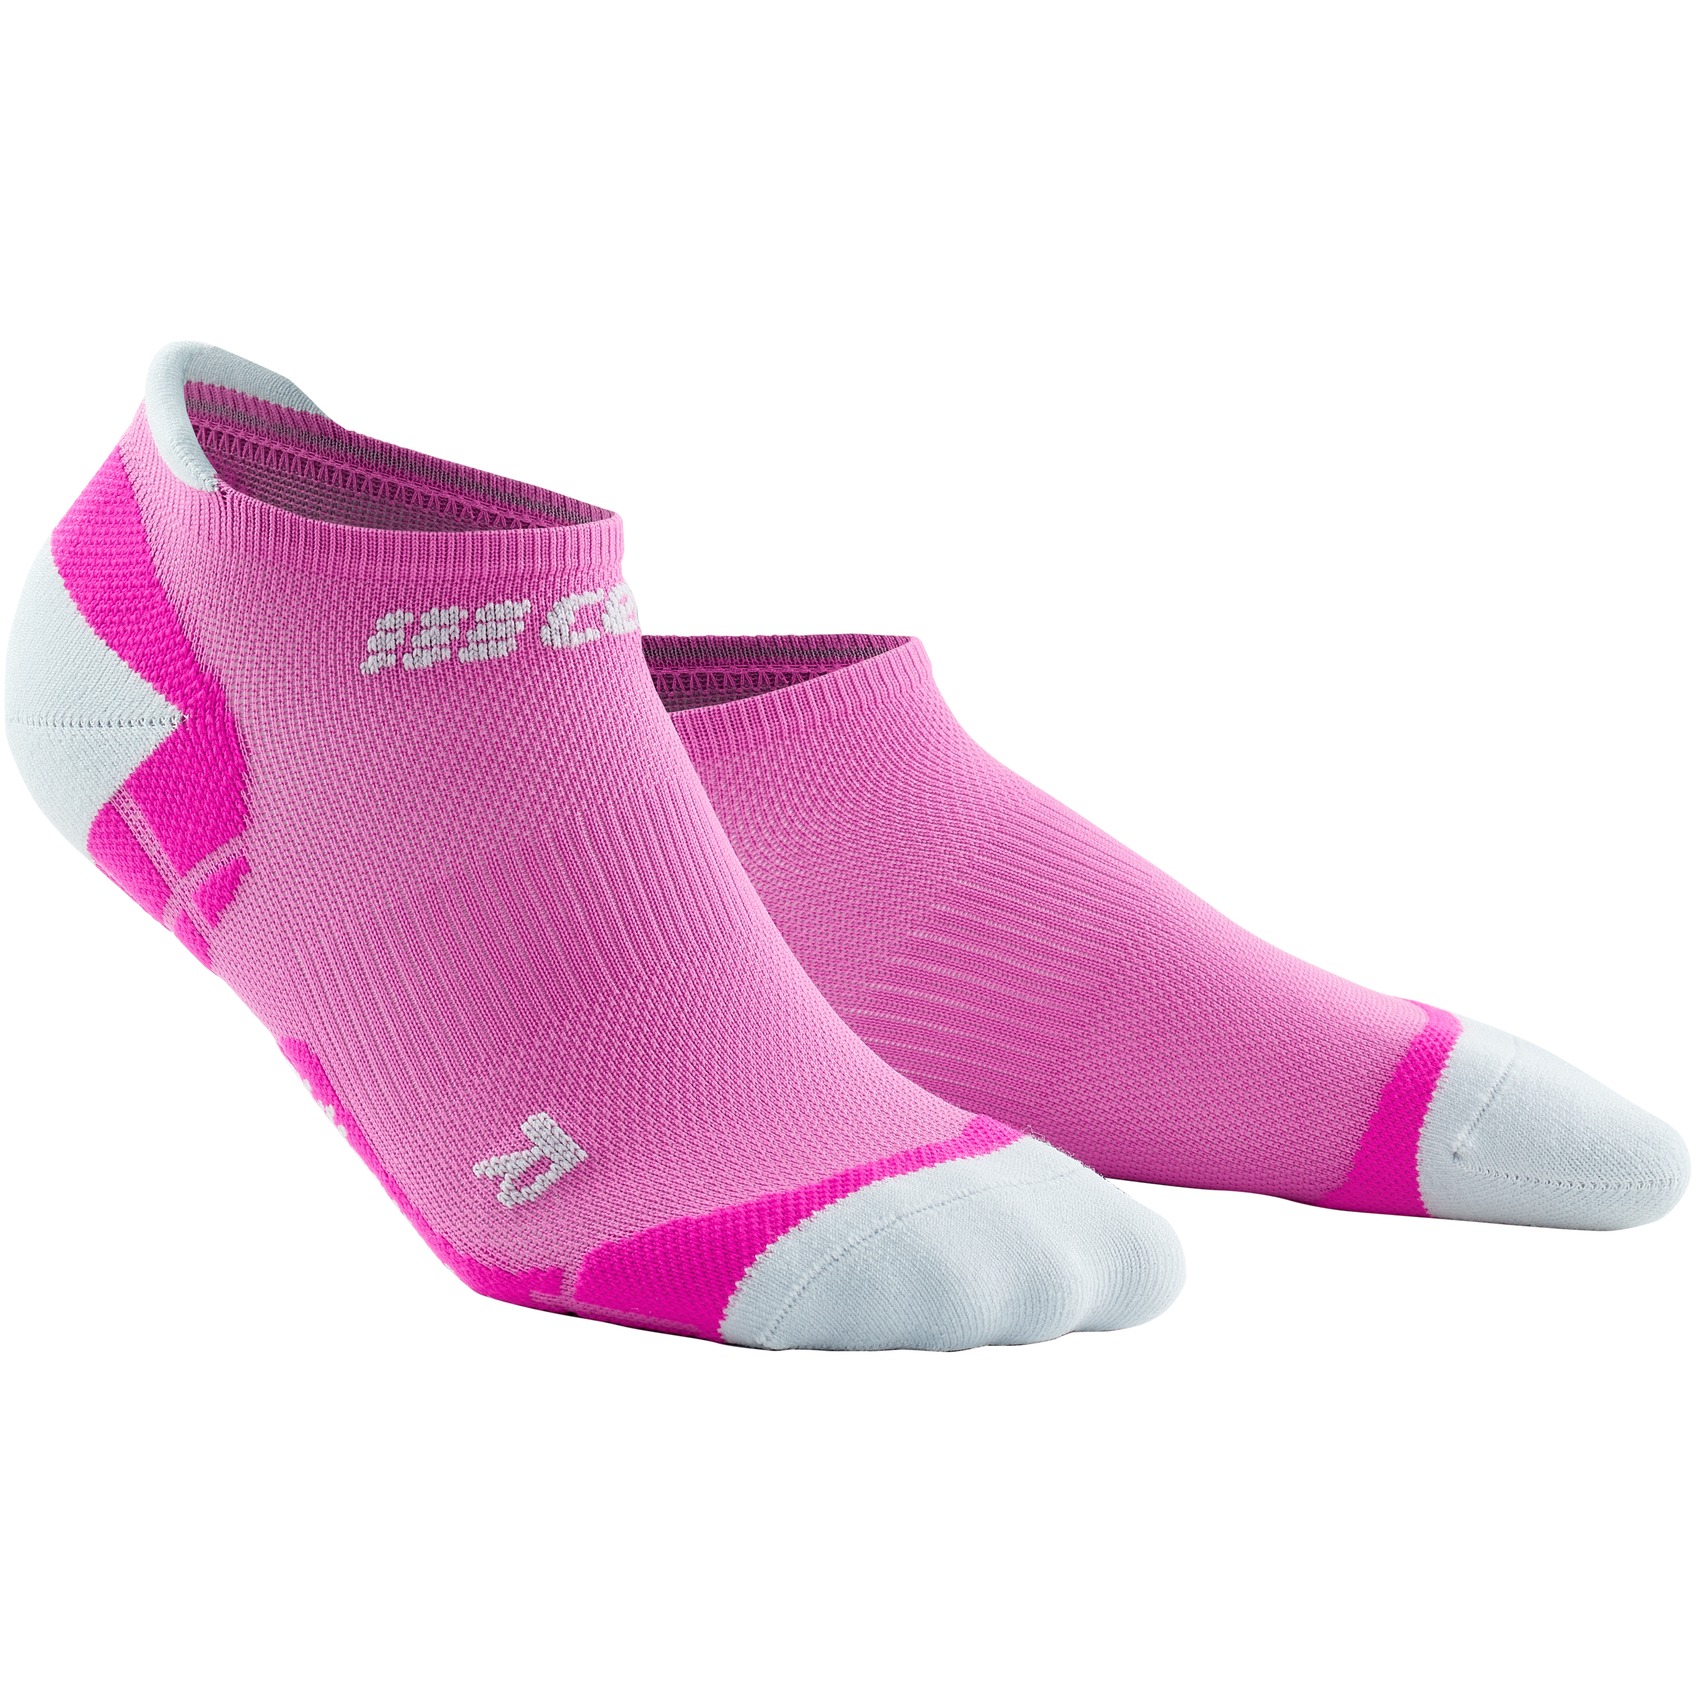 Picture of CEP Ultralight No Show Compression Socks Women - pink/light grey